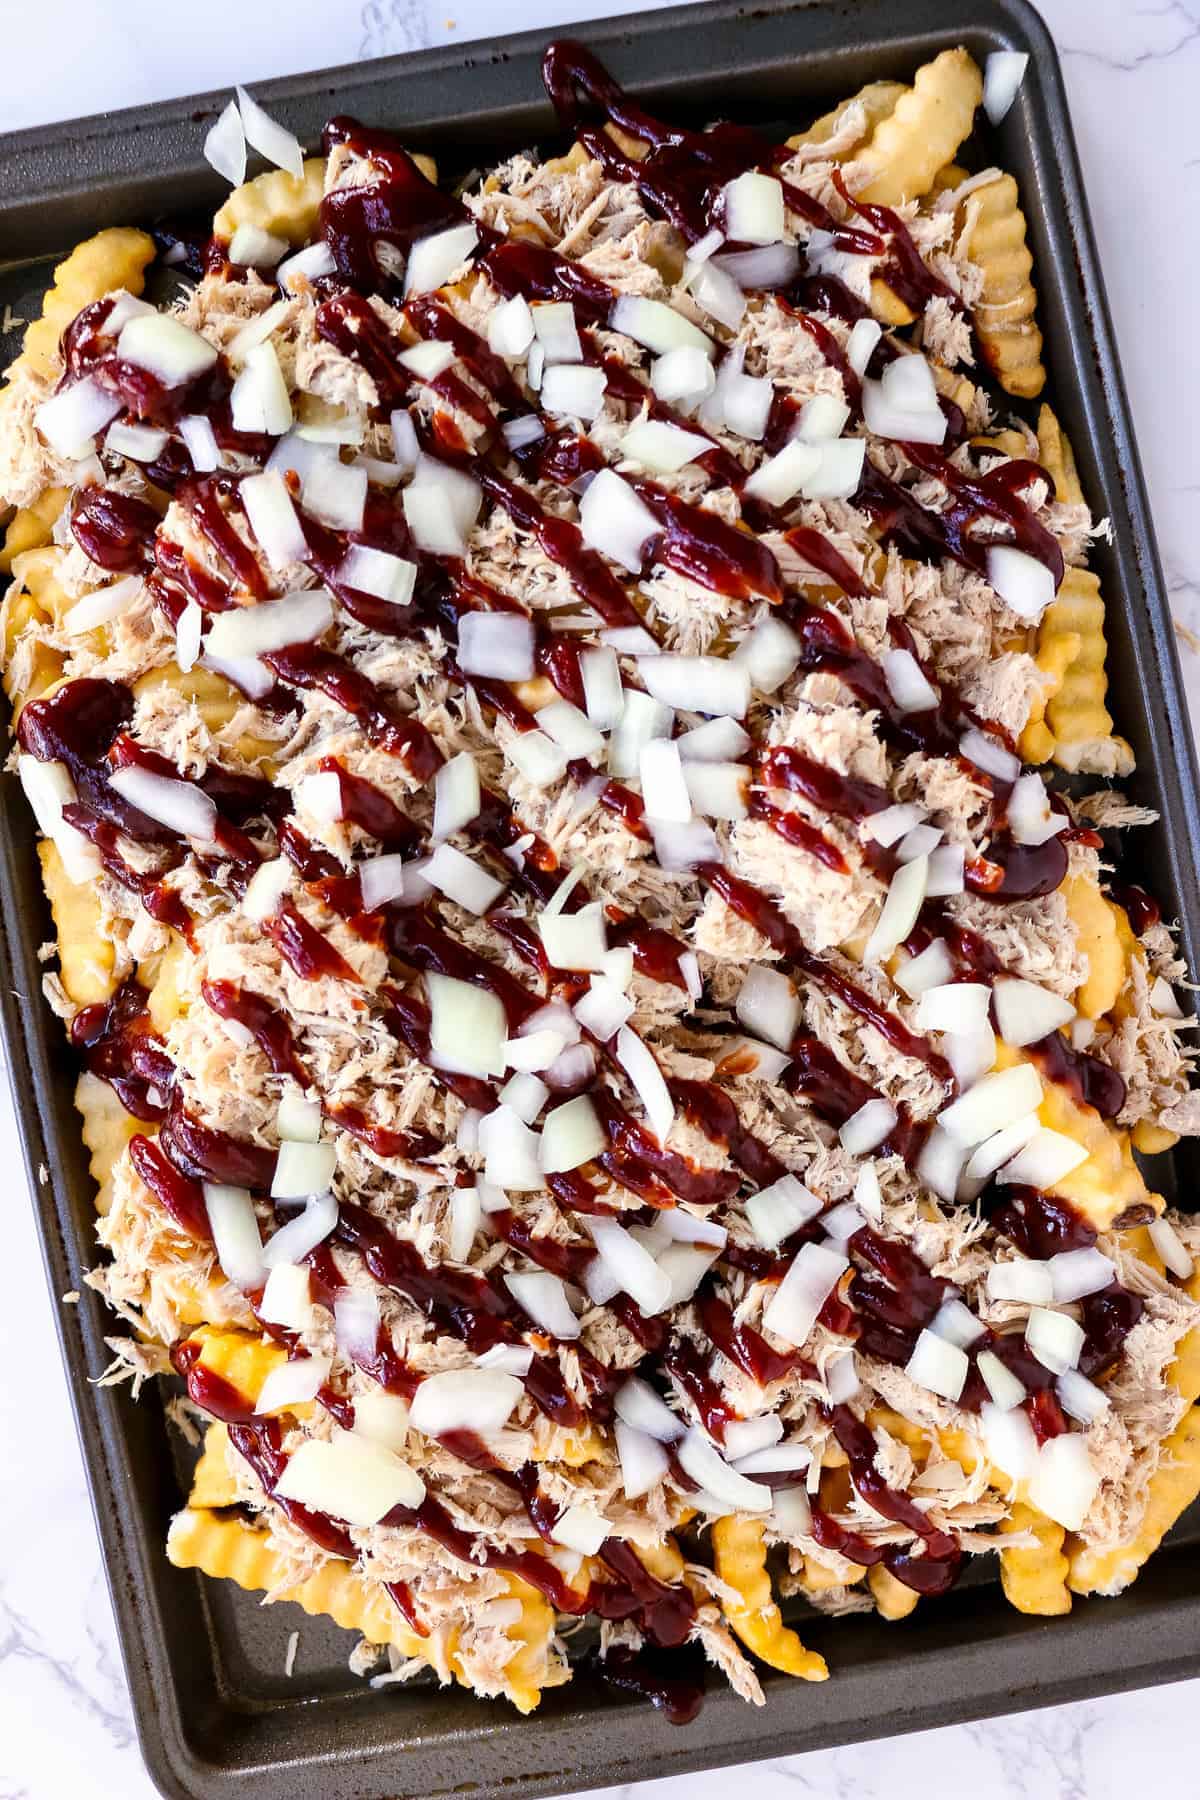 Sheet pan with frozen french fries, pulled pork, BBQ sauce and onions on it